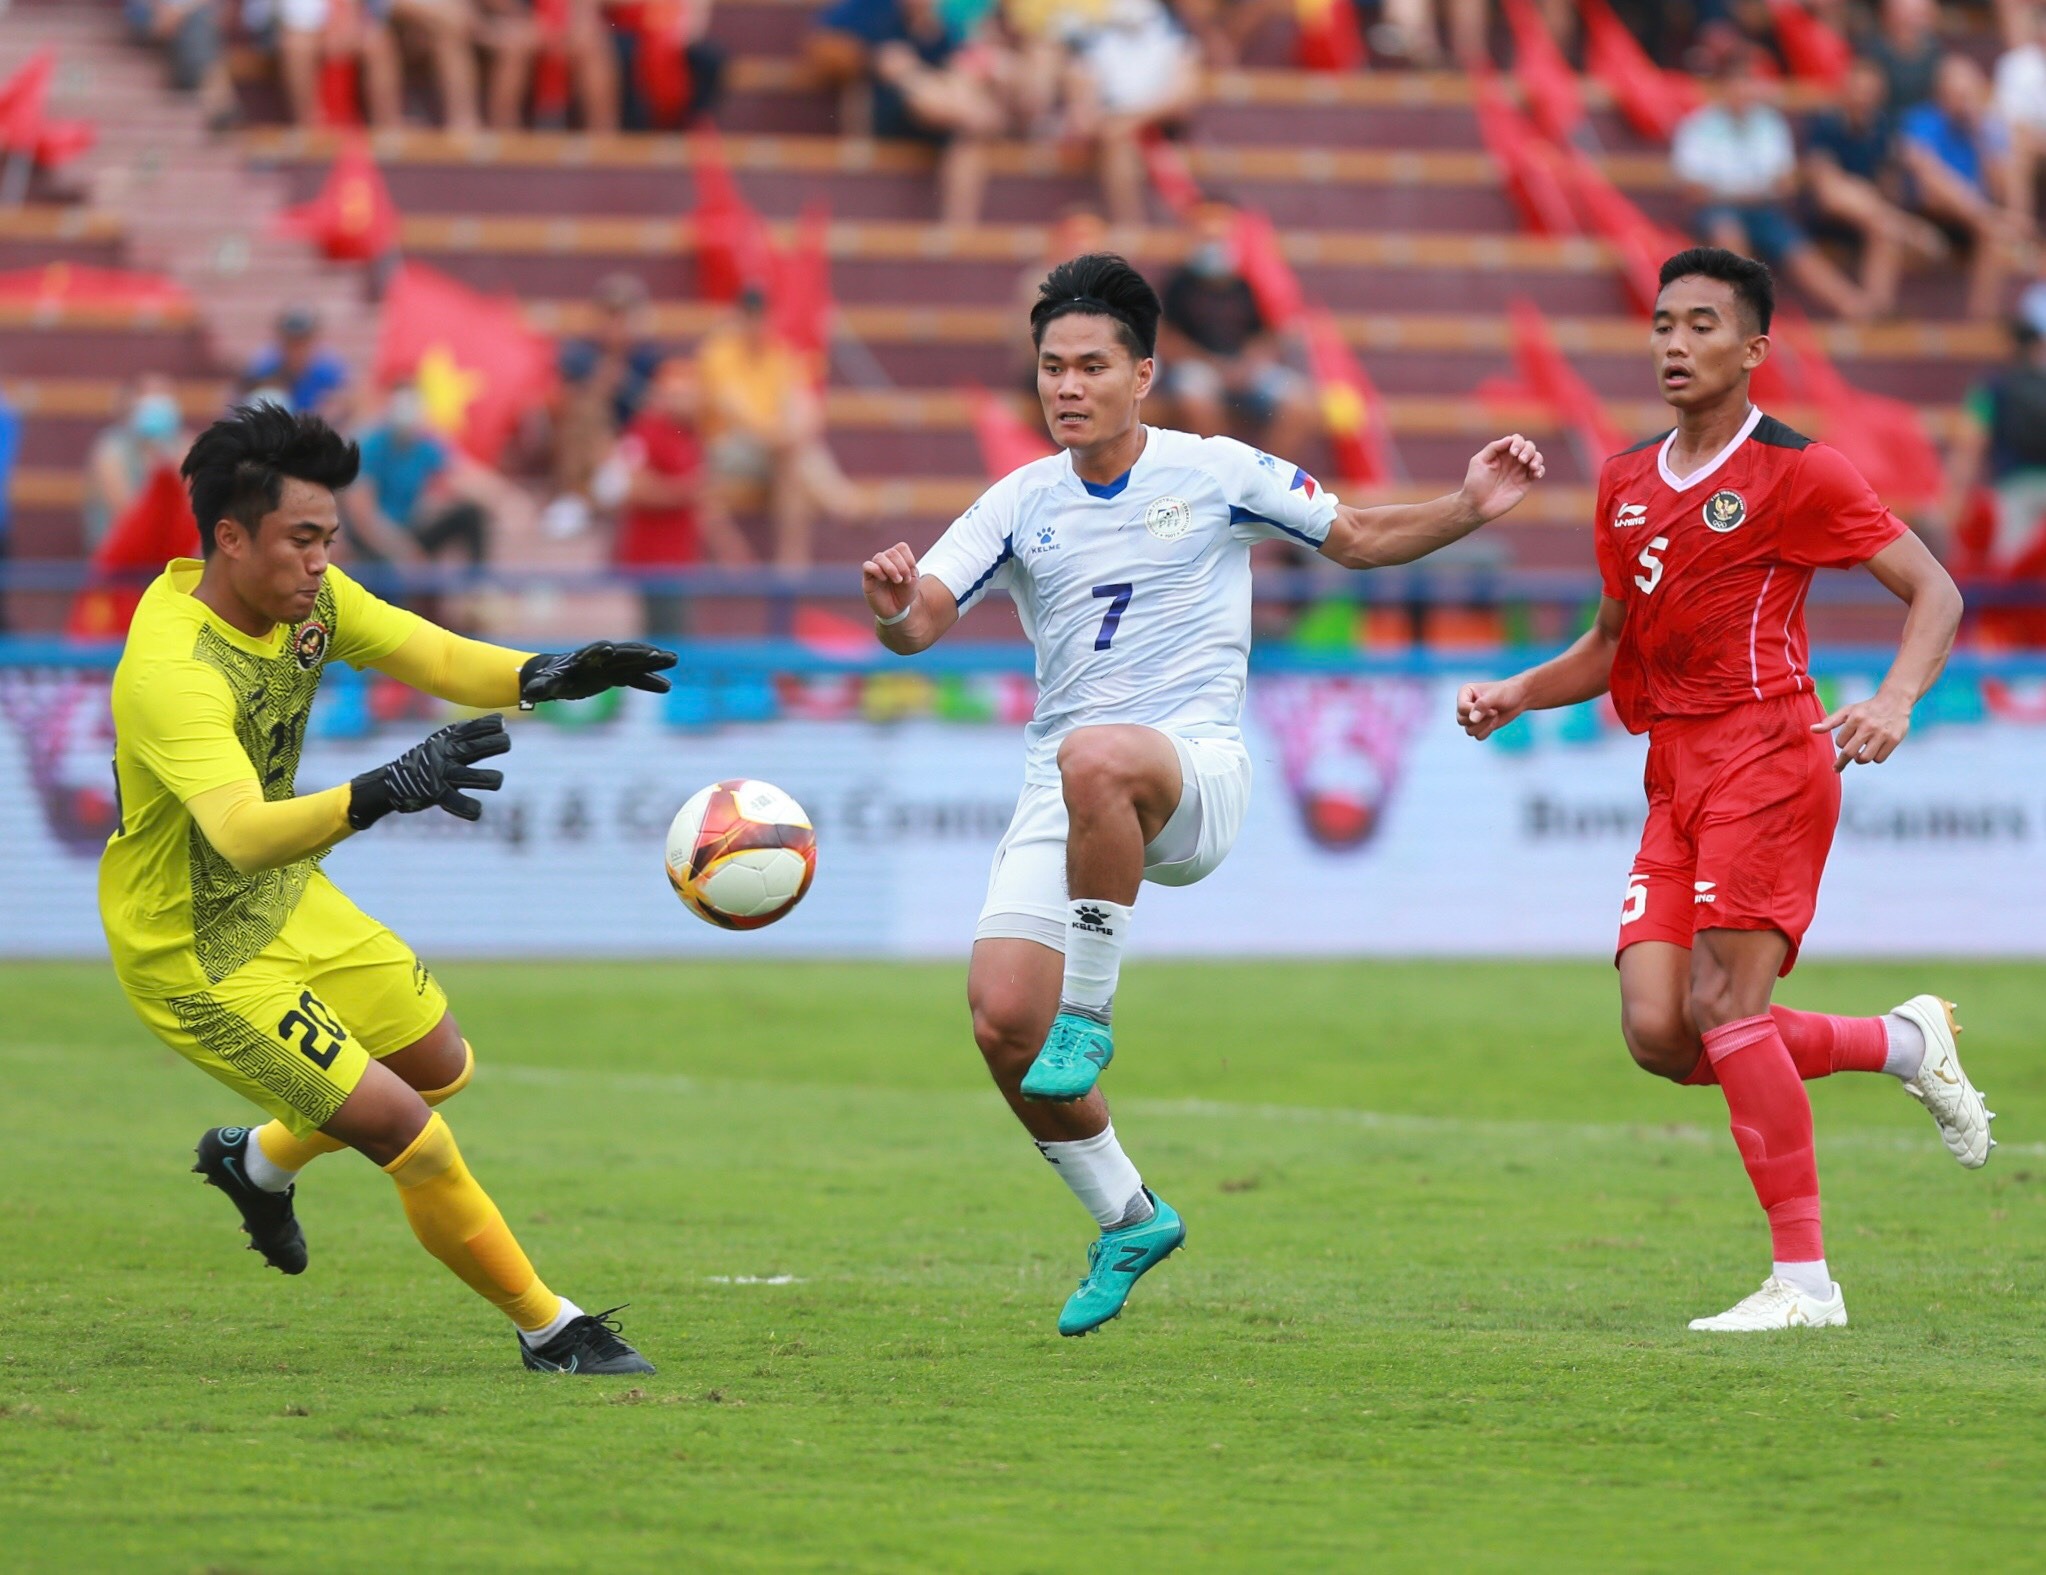 Philippines U23 team vs Indonesia in the 31st SEA Games men's football competition. ZING NEWS PHOTO